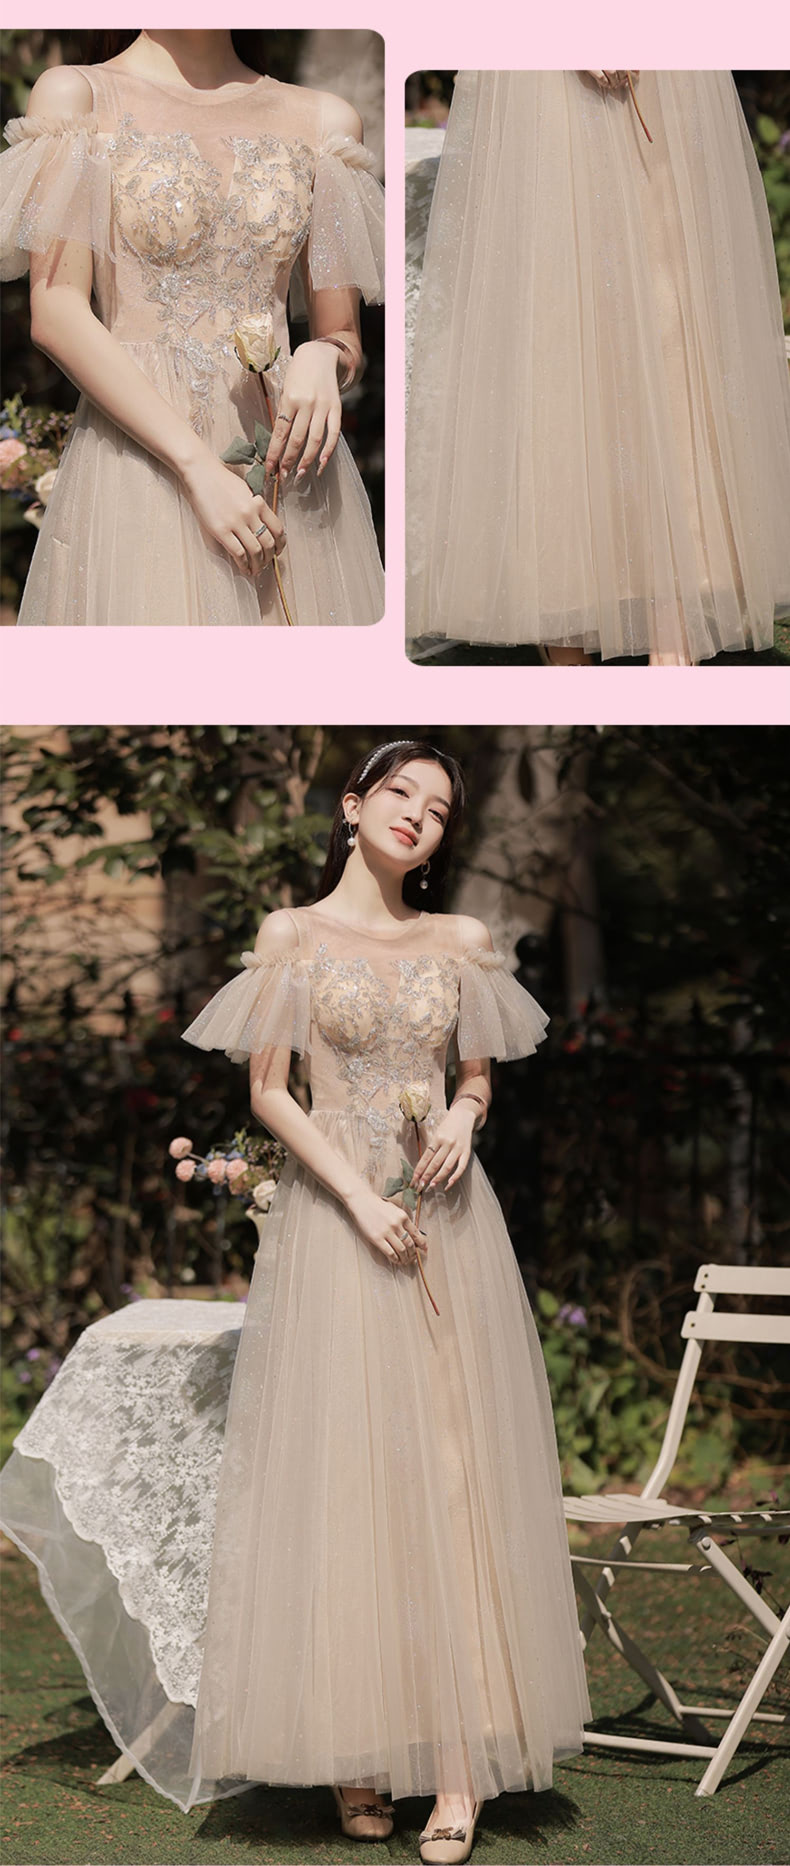 Formal-Apricot-Bridesmaid-Dress-Evening-Gown-for-Wedding-Party24.jpg